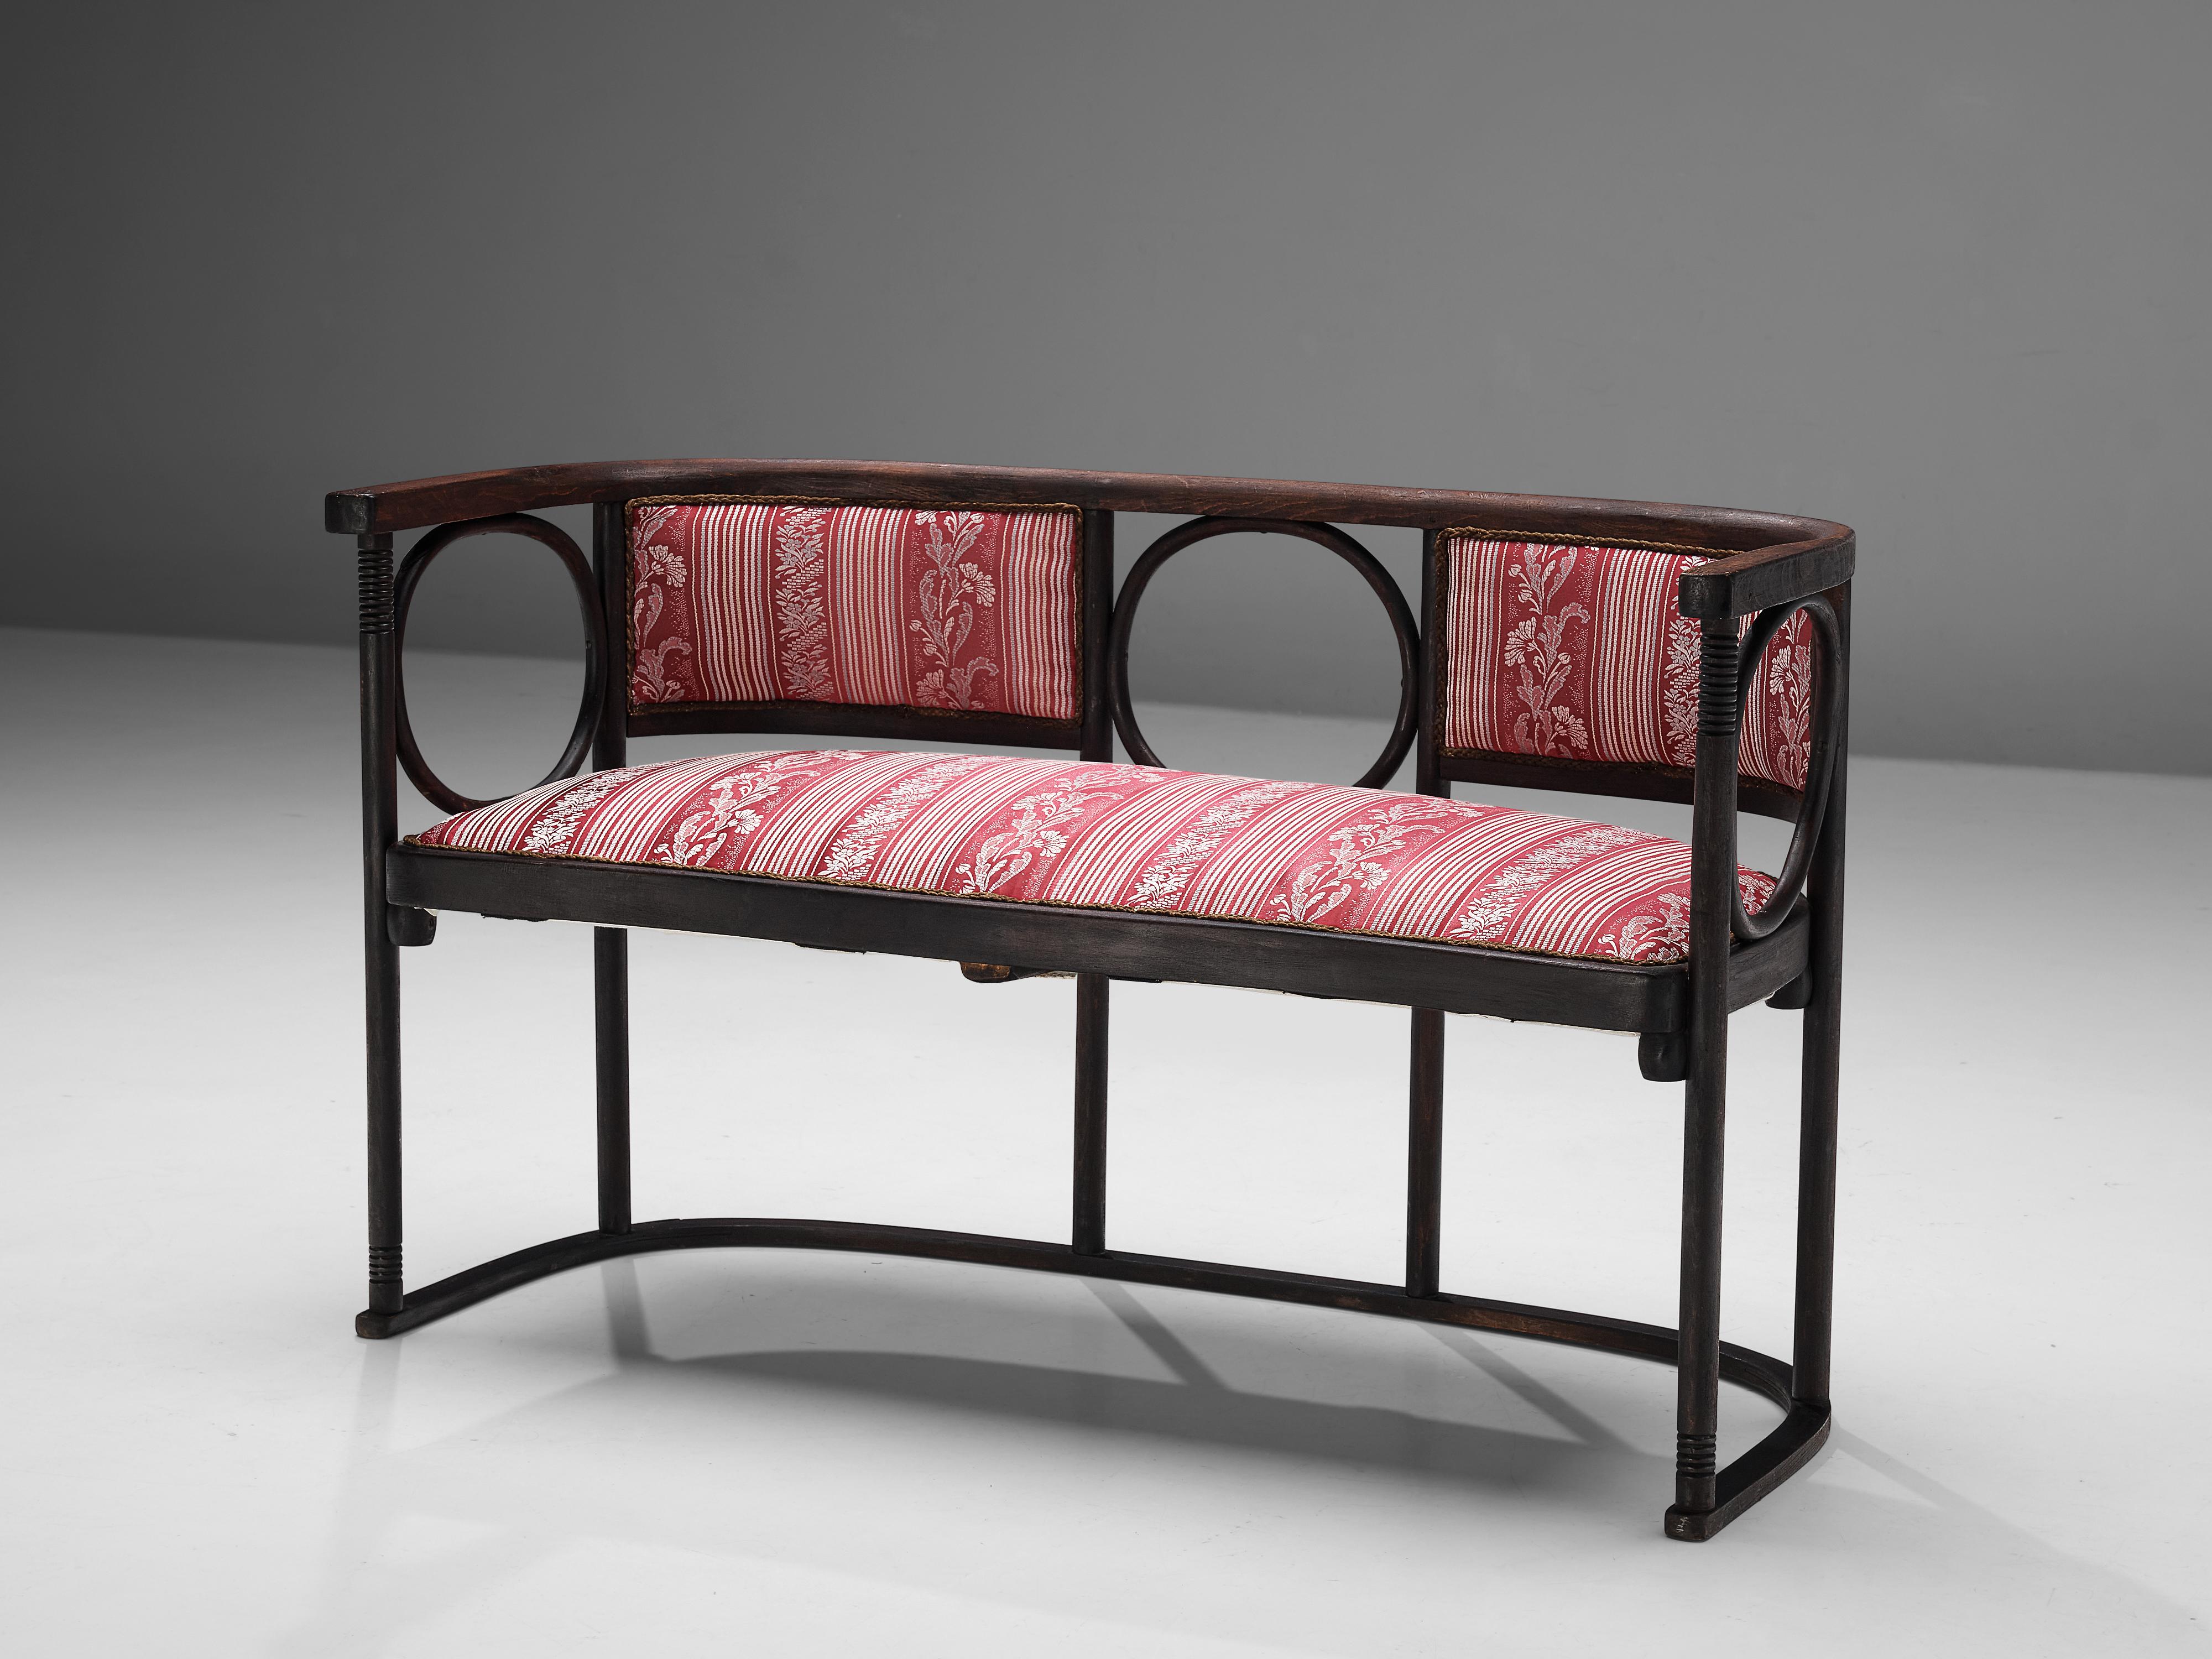 Josef Hoffmann, bench, Austria, design 1907 

This bench is specially designed by Josef Hoffmann (1870-1956) for the Cabaret Fledermaus in Vienna in 1907. This building was understood as a place where the ‘boredom’ of contemporary life would be